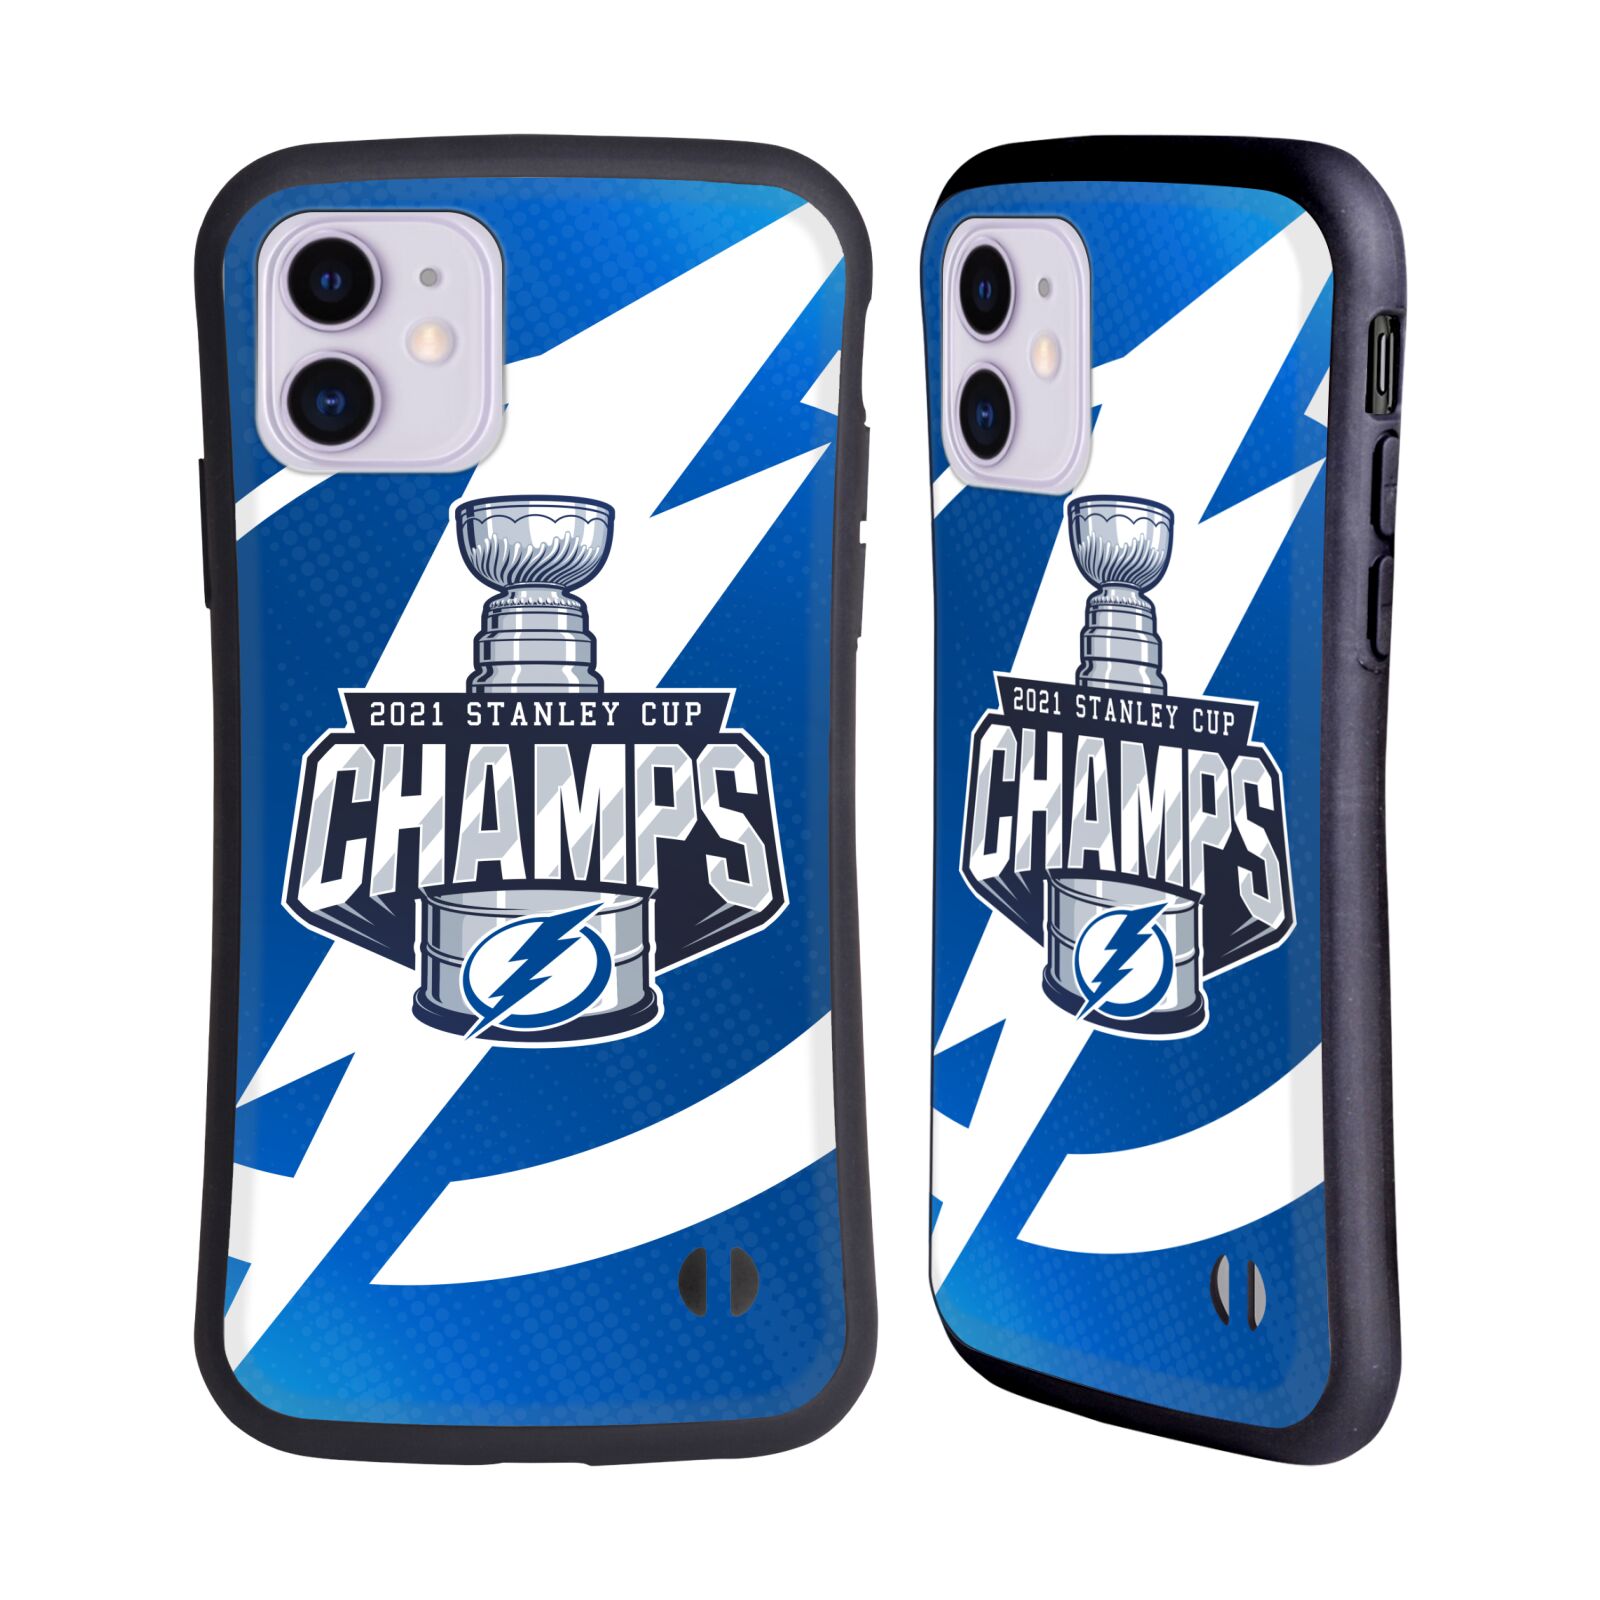 Obal na mobil Apple iPhone 11 - HEAD CASE - NHL - Stanely Cup 2021 Tampa Bay